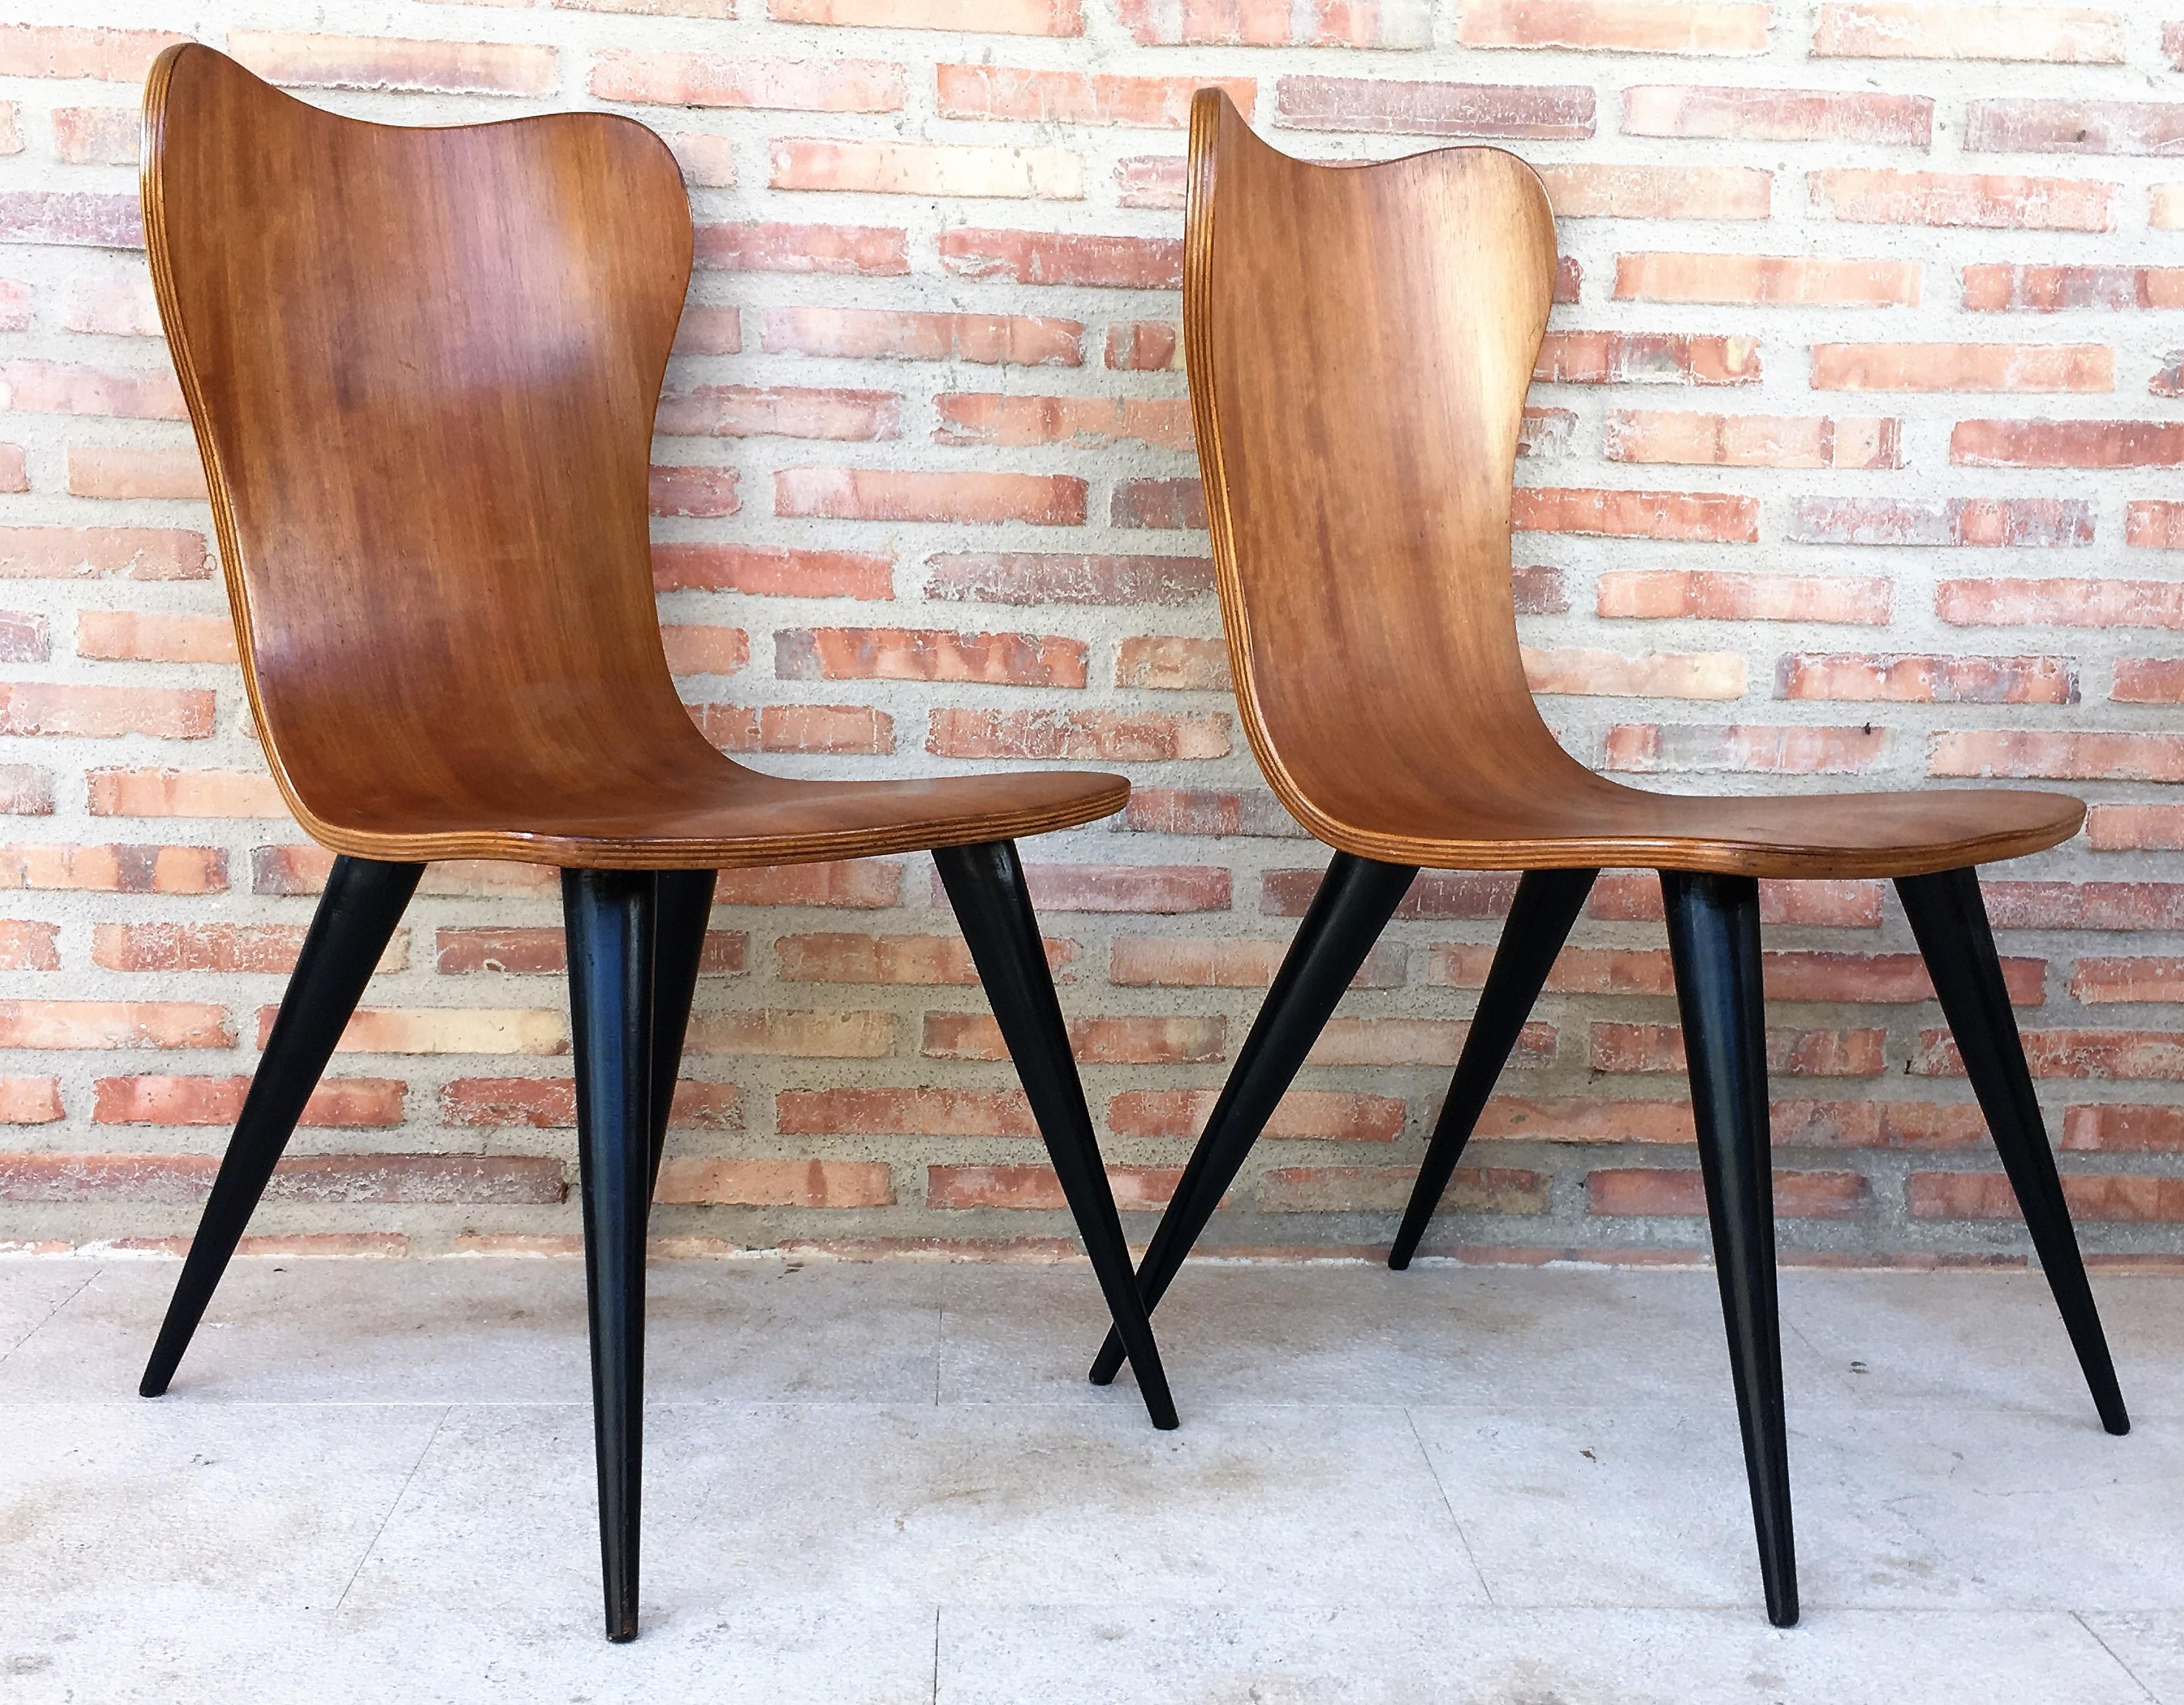 Pair of midcentury Arne Jacobsen style chairs with black tapered legs.